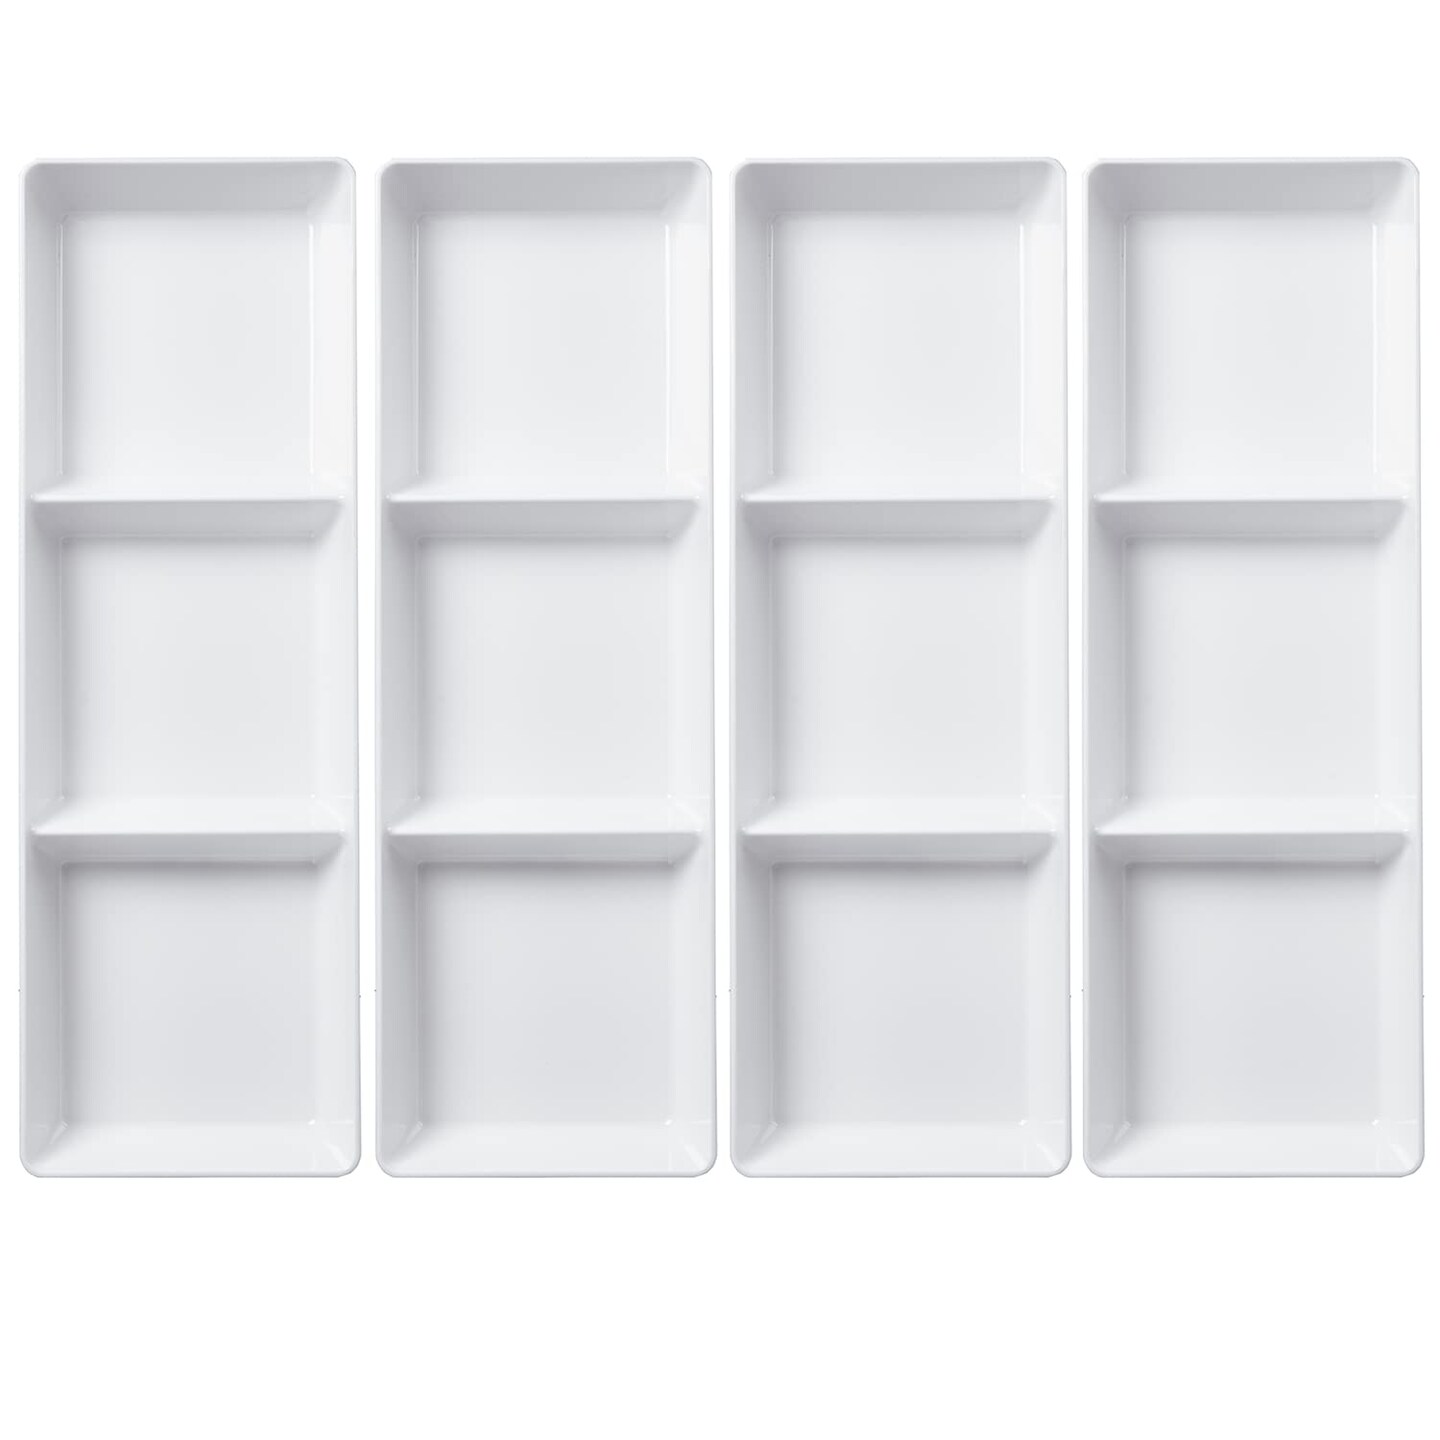 US Acrylic Avant White Plastic Divided Serving Trays (Set of 4) 15&#x201D; x 5&#x201D; | Narrow Reusable 3-Section Party Platters | Serve Appetizers, Fruit, Veggies, &#x26; Desserts | BPA-Free &#x26; Made in USA